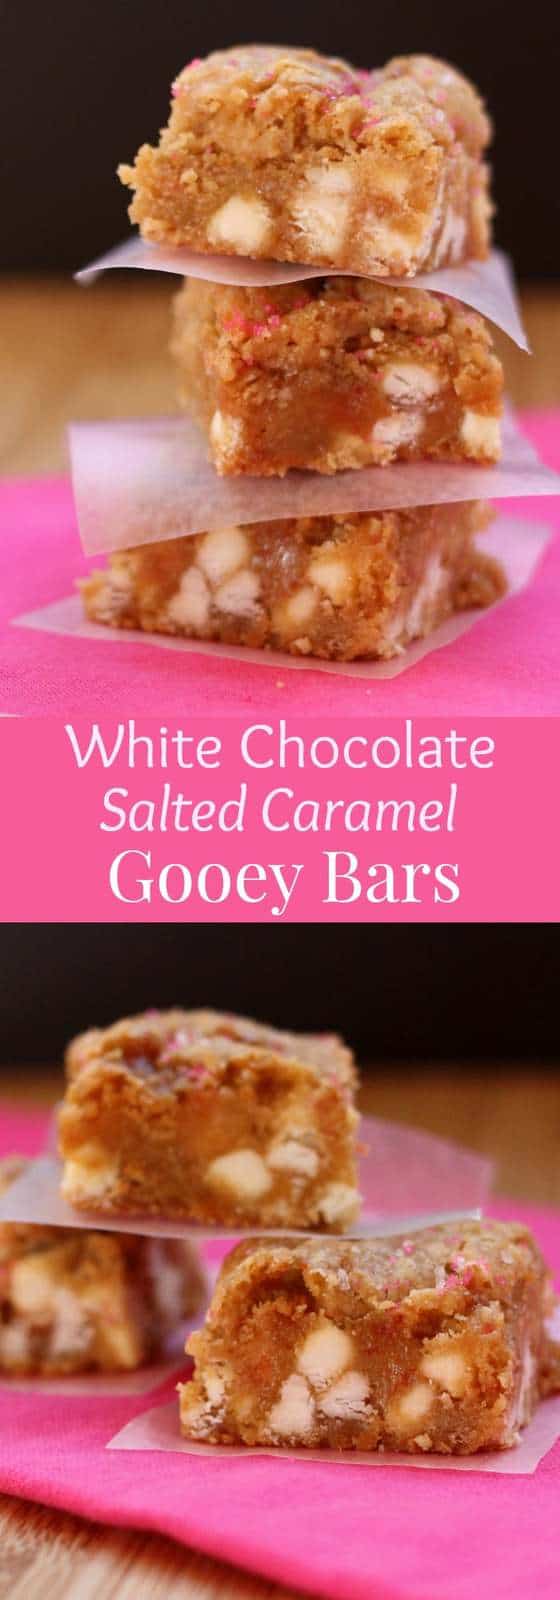 Pinterest title image for White Chocolate Salted Caramel Gooey Bars.